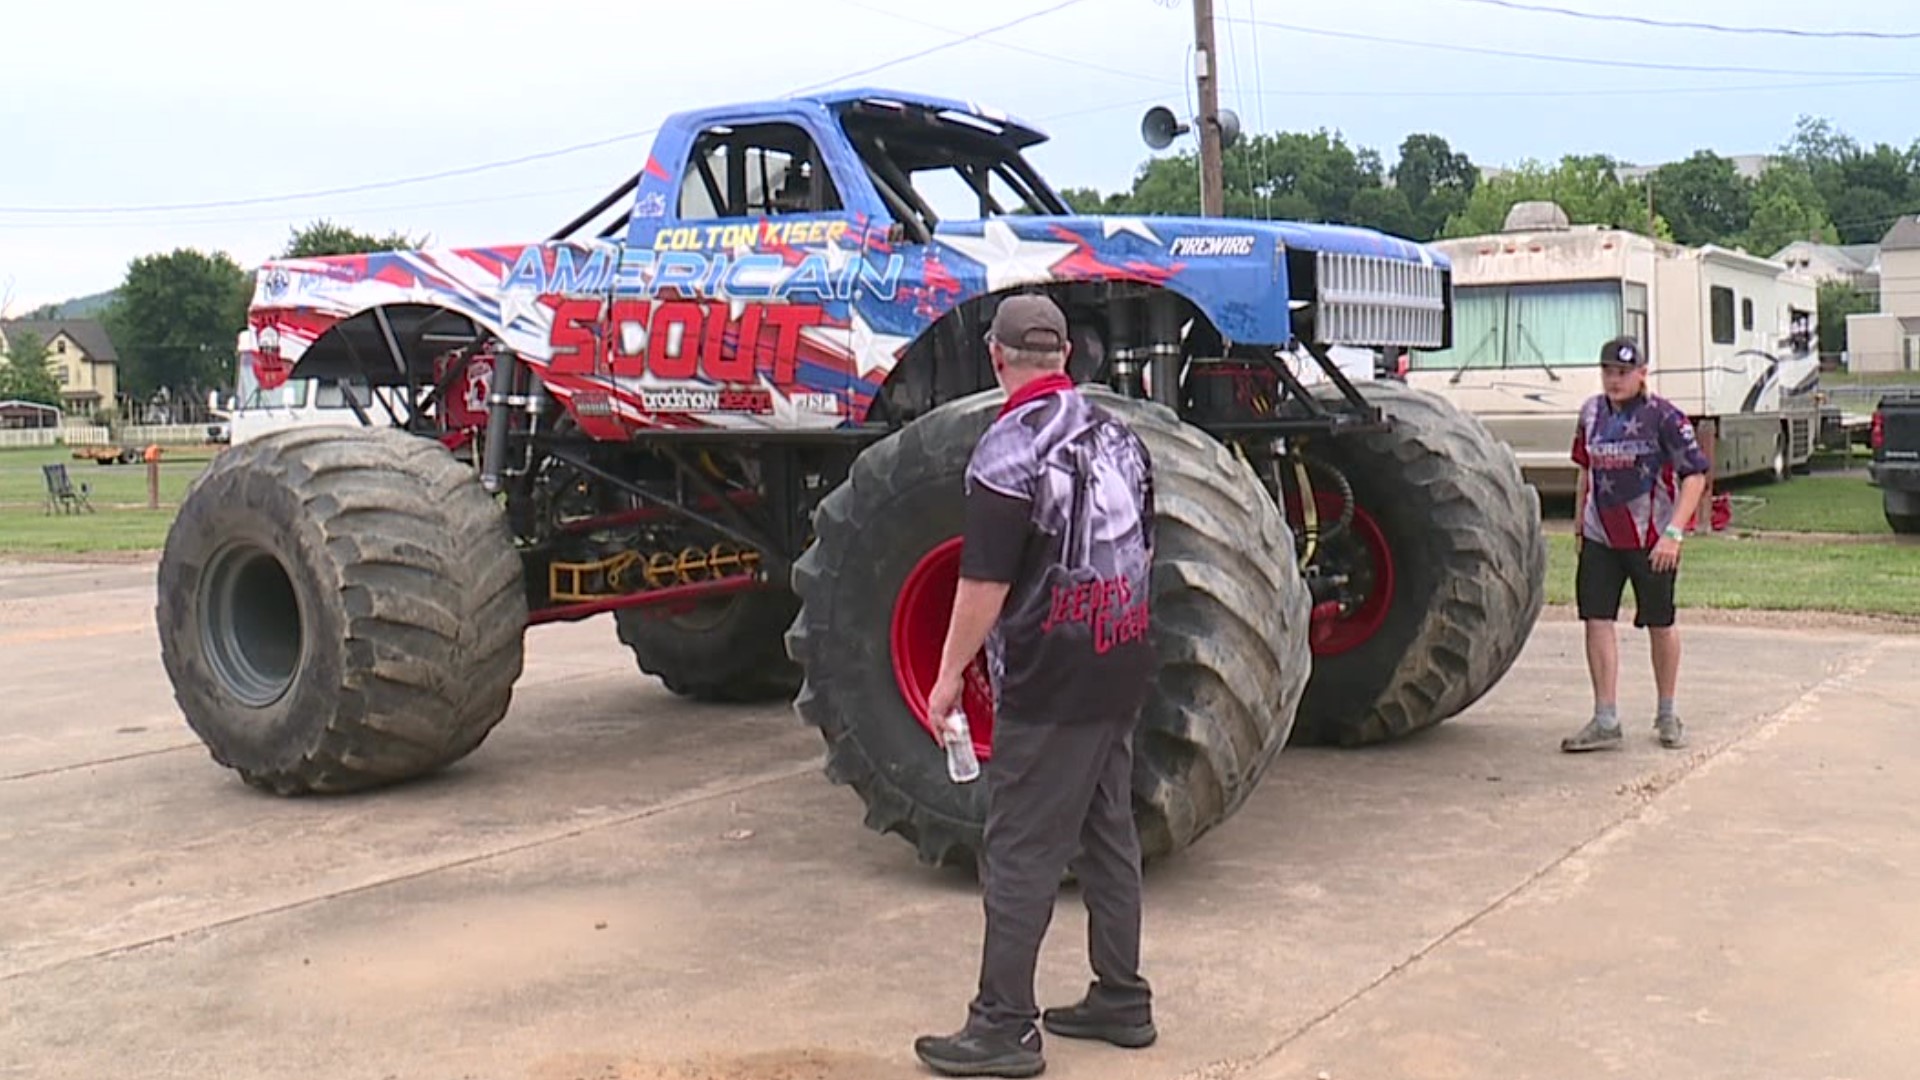 Monster trucks are taking over the Bloomsburg Fairgrounds this weekend. Newswatch 16's Emily Kress takes us to Columbia County for the 4- Wheel Jamboree.